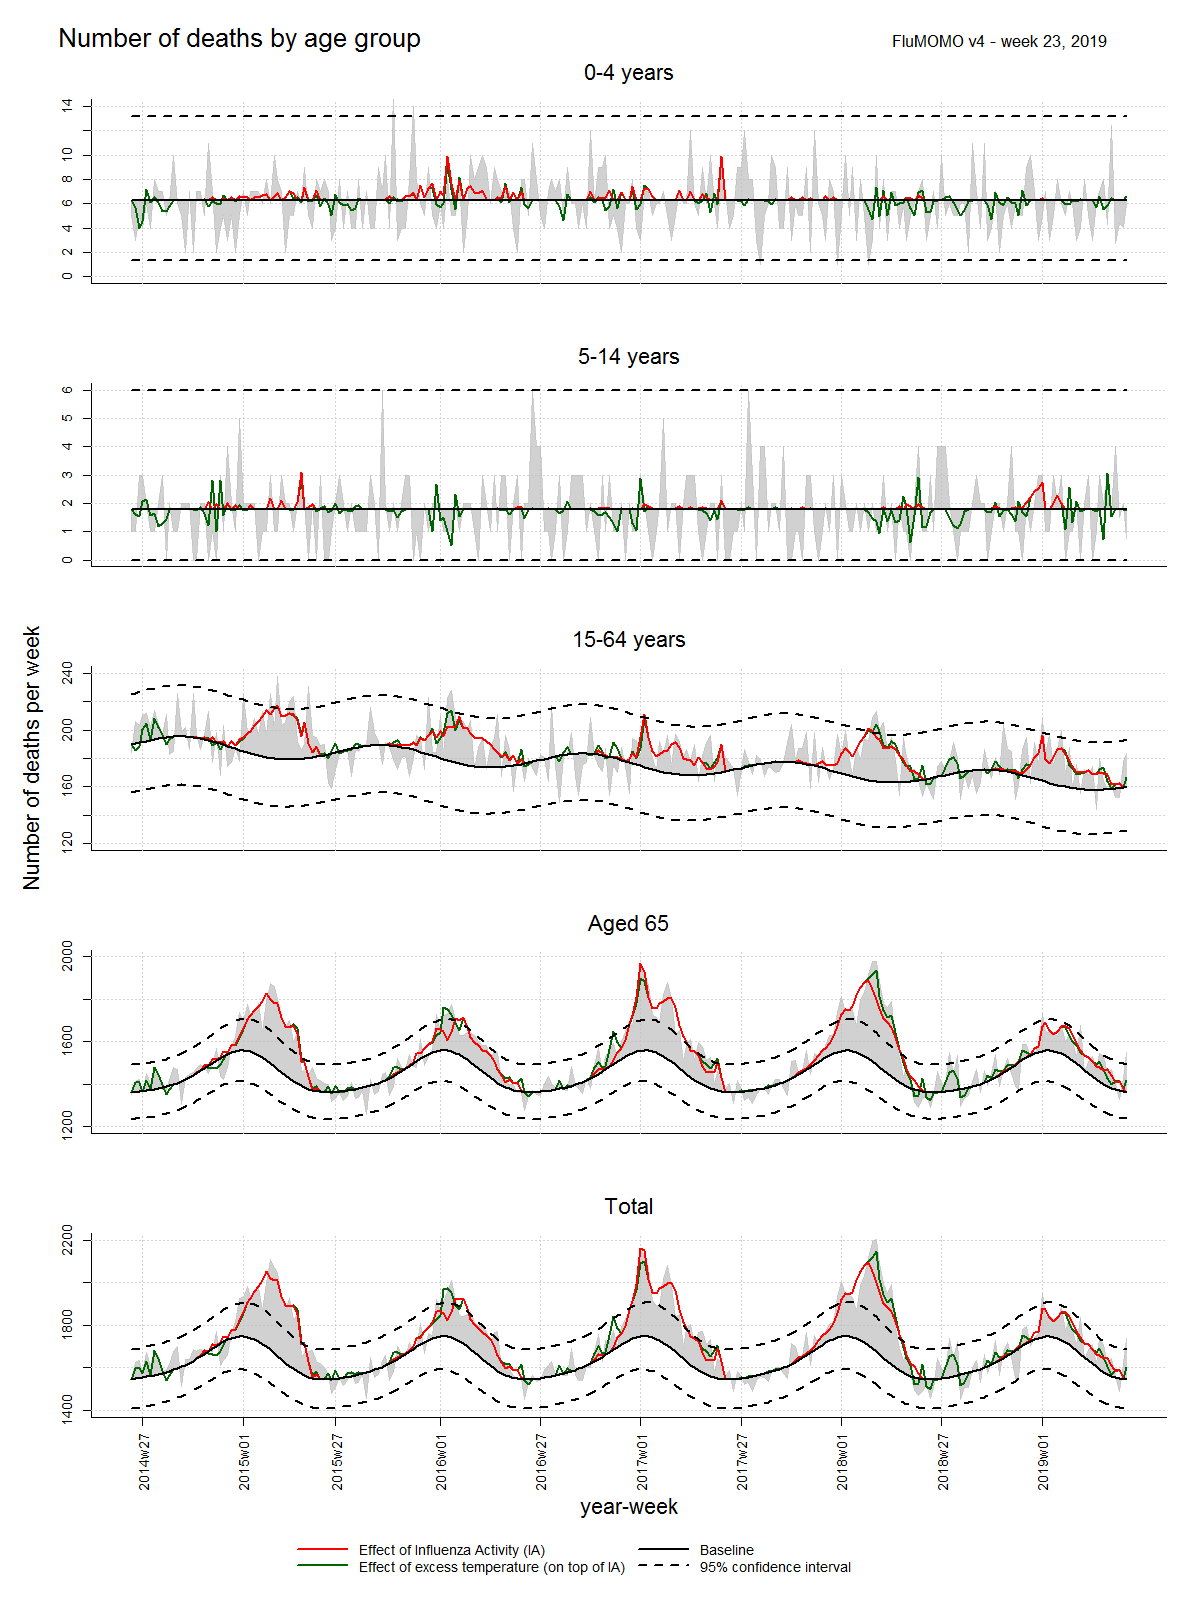 Graph showing the trends in excess mortality by week from 2014 to 2019. High peaks are seen among the elderly in the 2014-2015, 2016-2017, 2017-2018 seasons. 